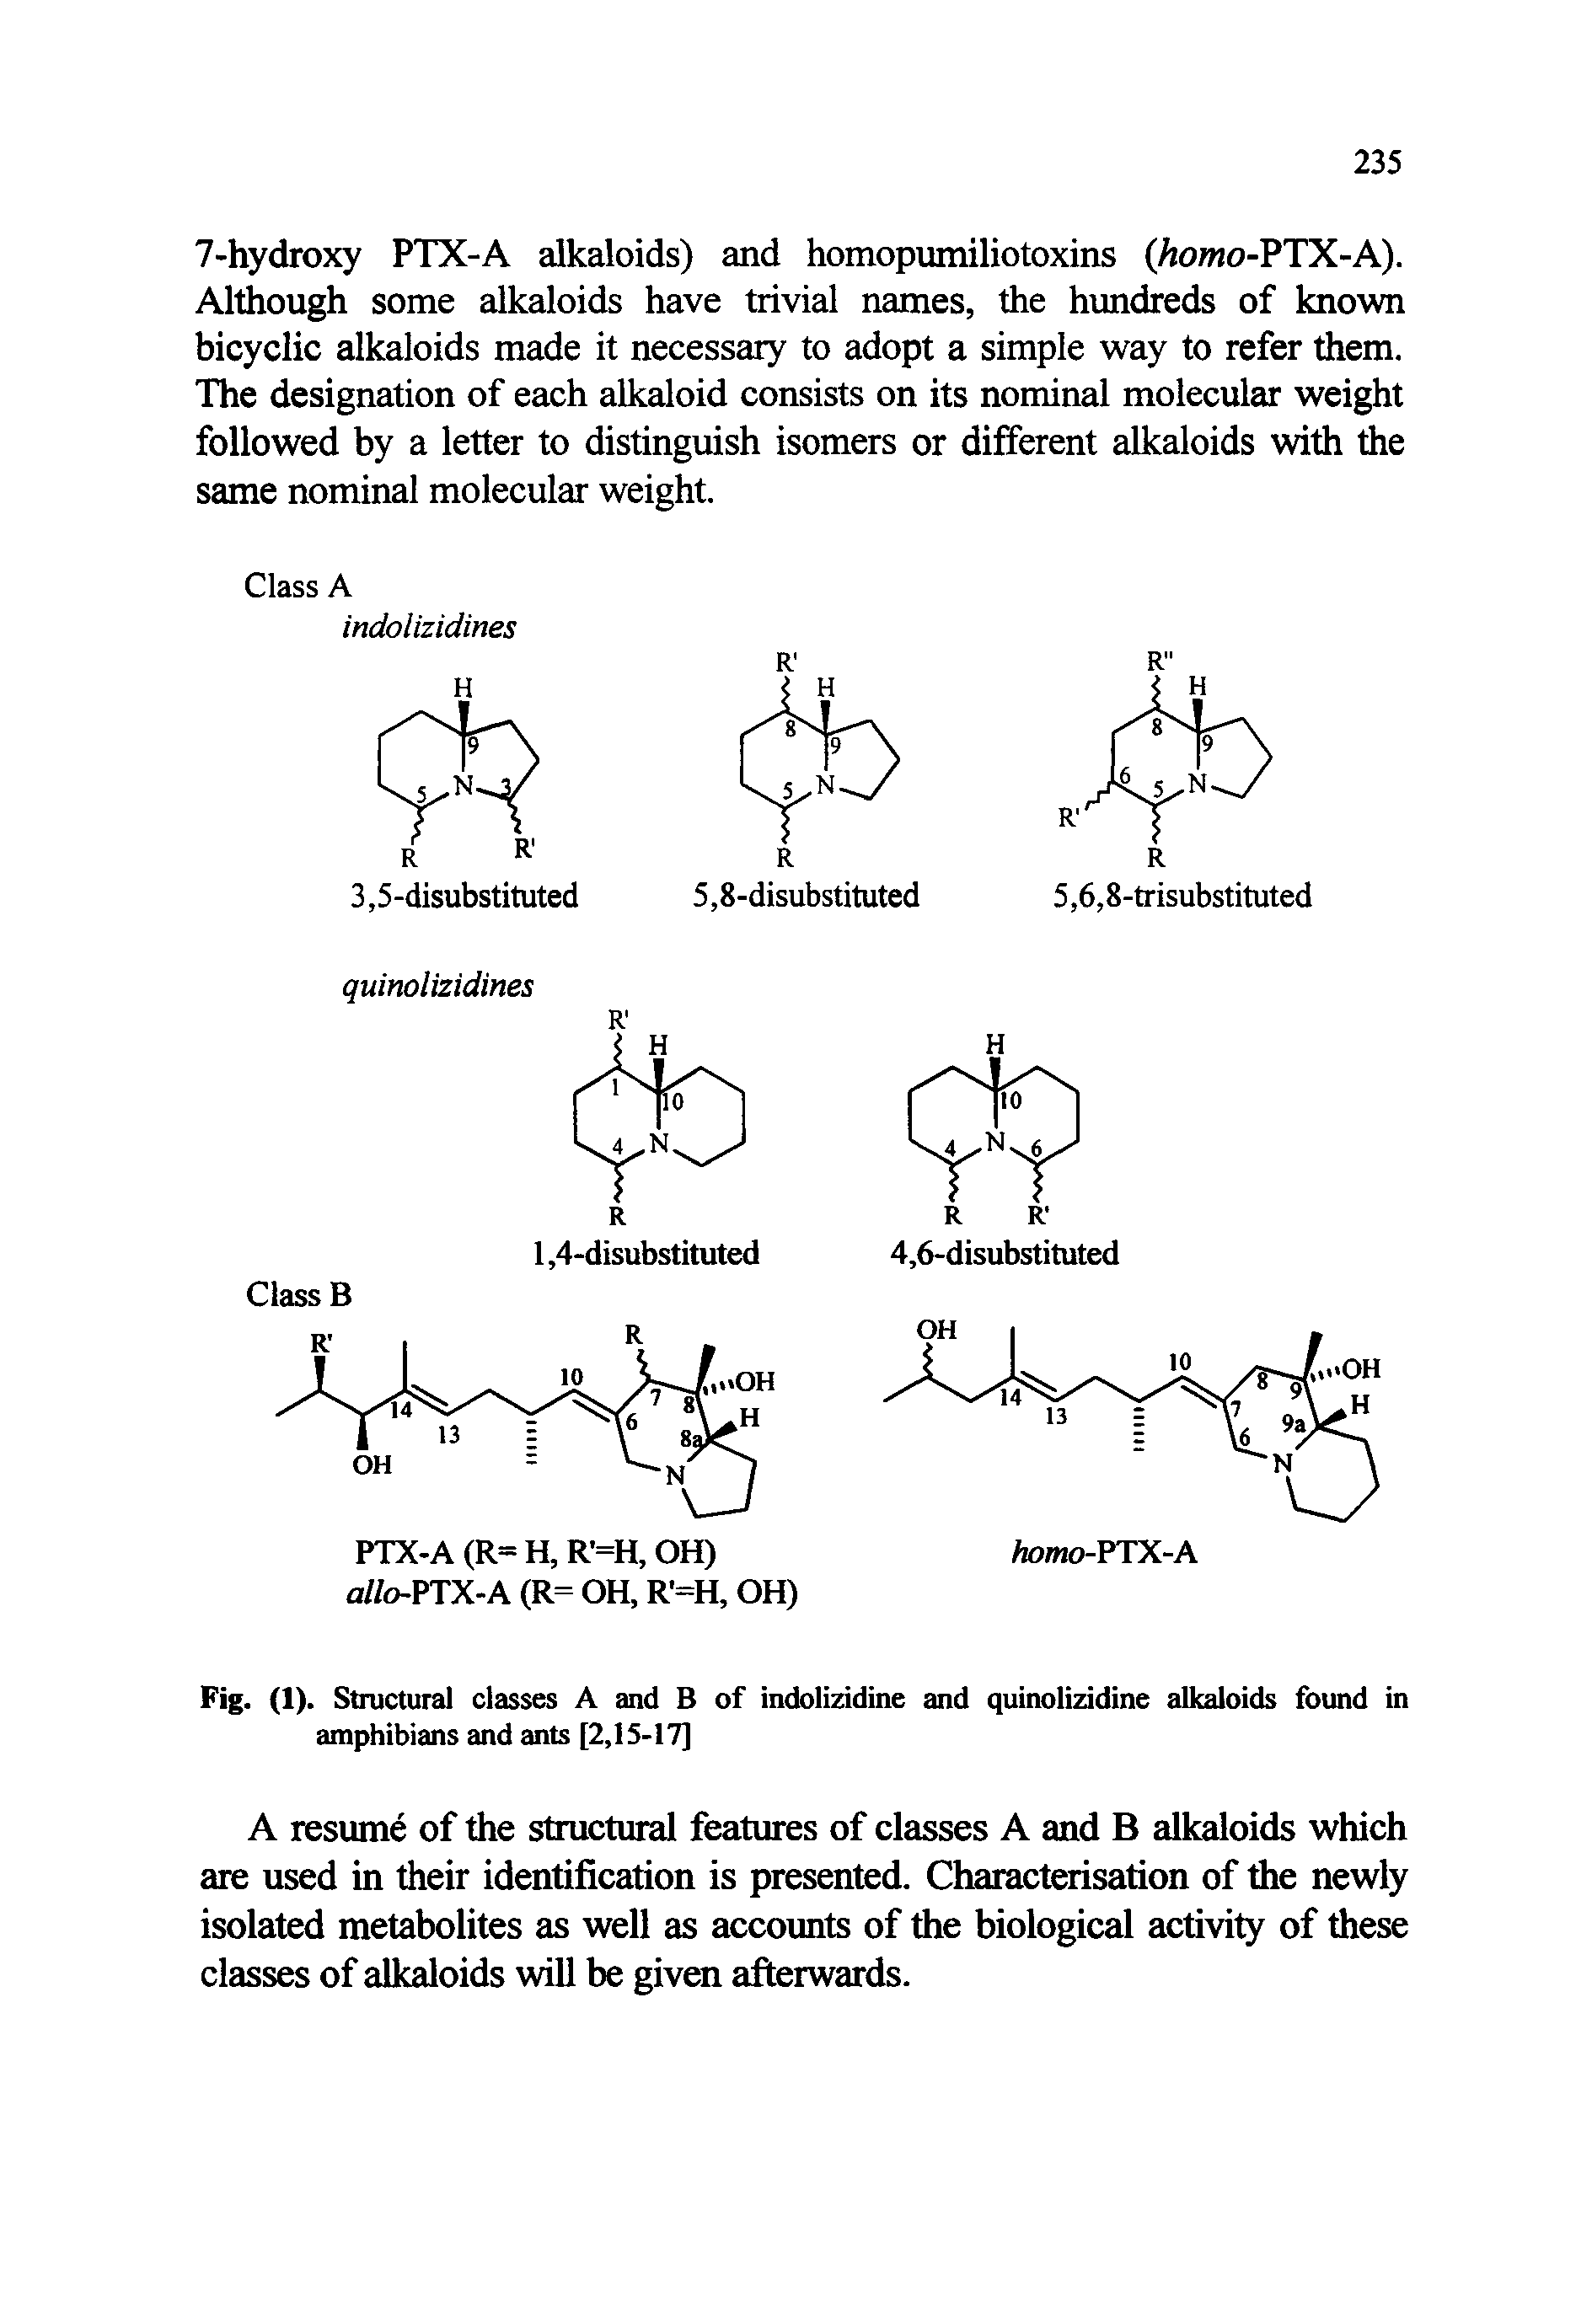 Fig. (1). Structural classes A and B of indolizidine and quinolizidine alkaloids found in amphibians and ants [2,15-17]...